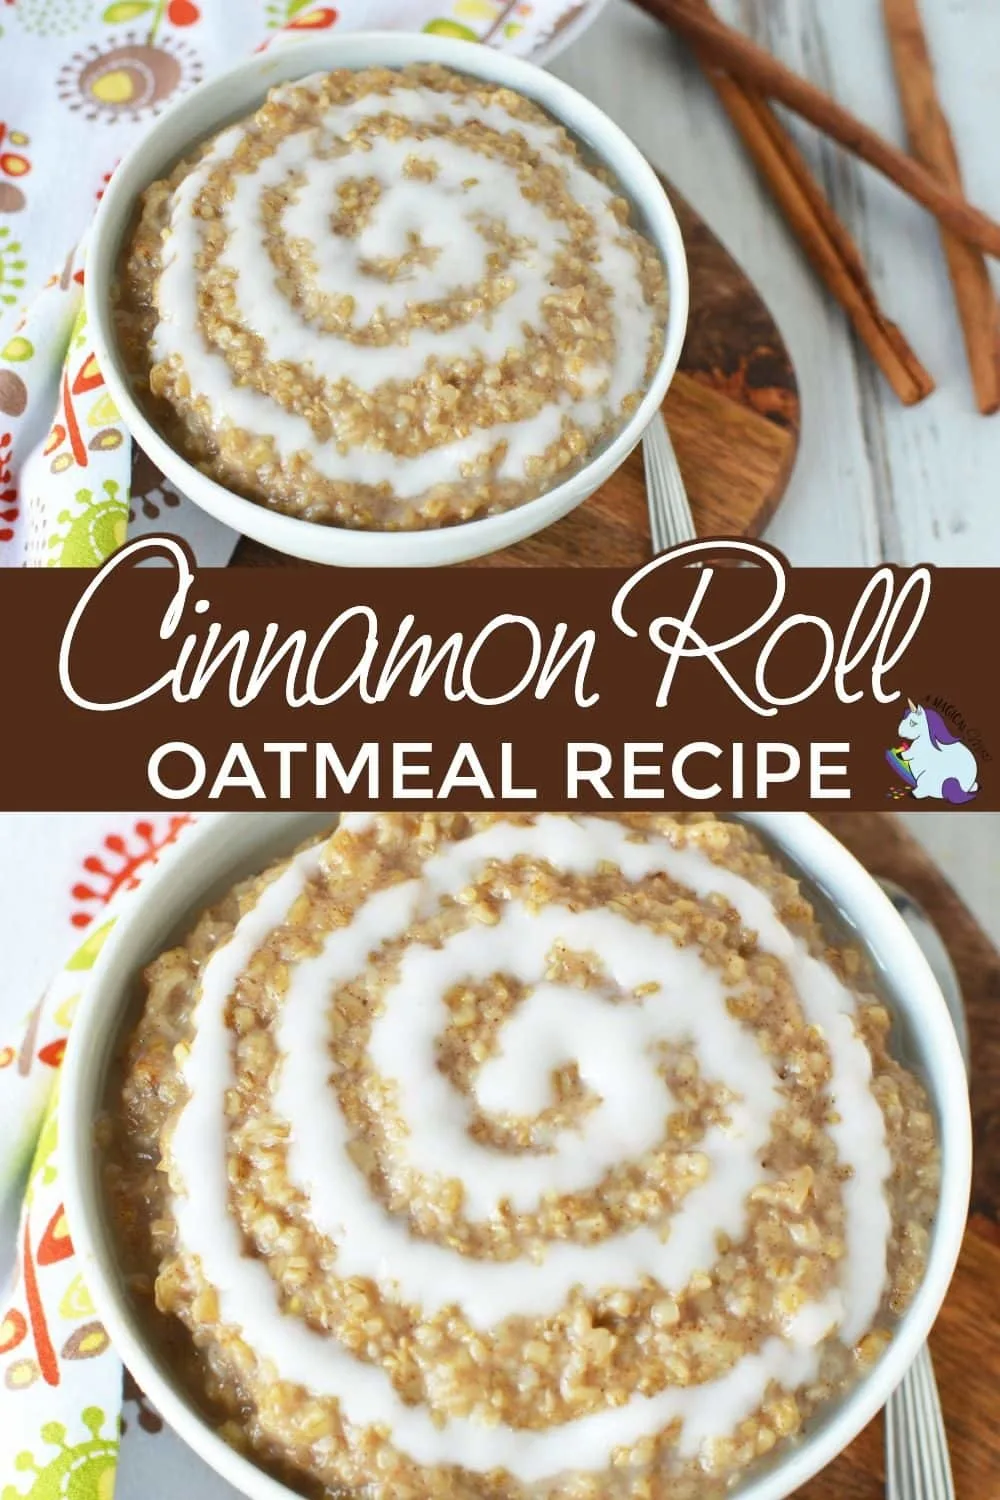 Bowls of cinnamon roll oat meal sitting on a table